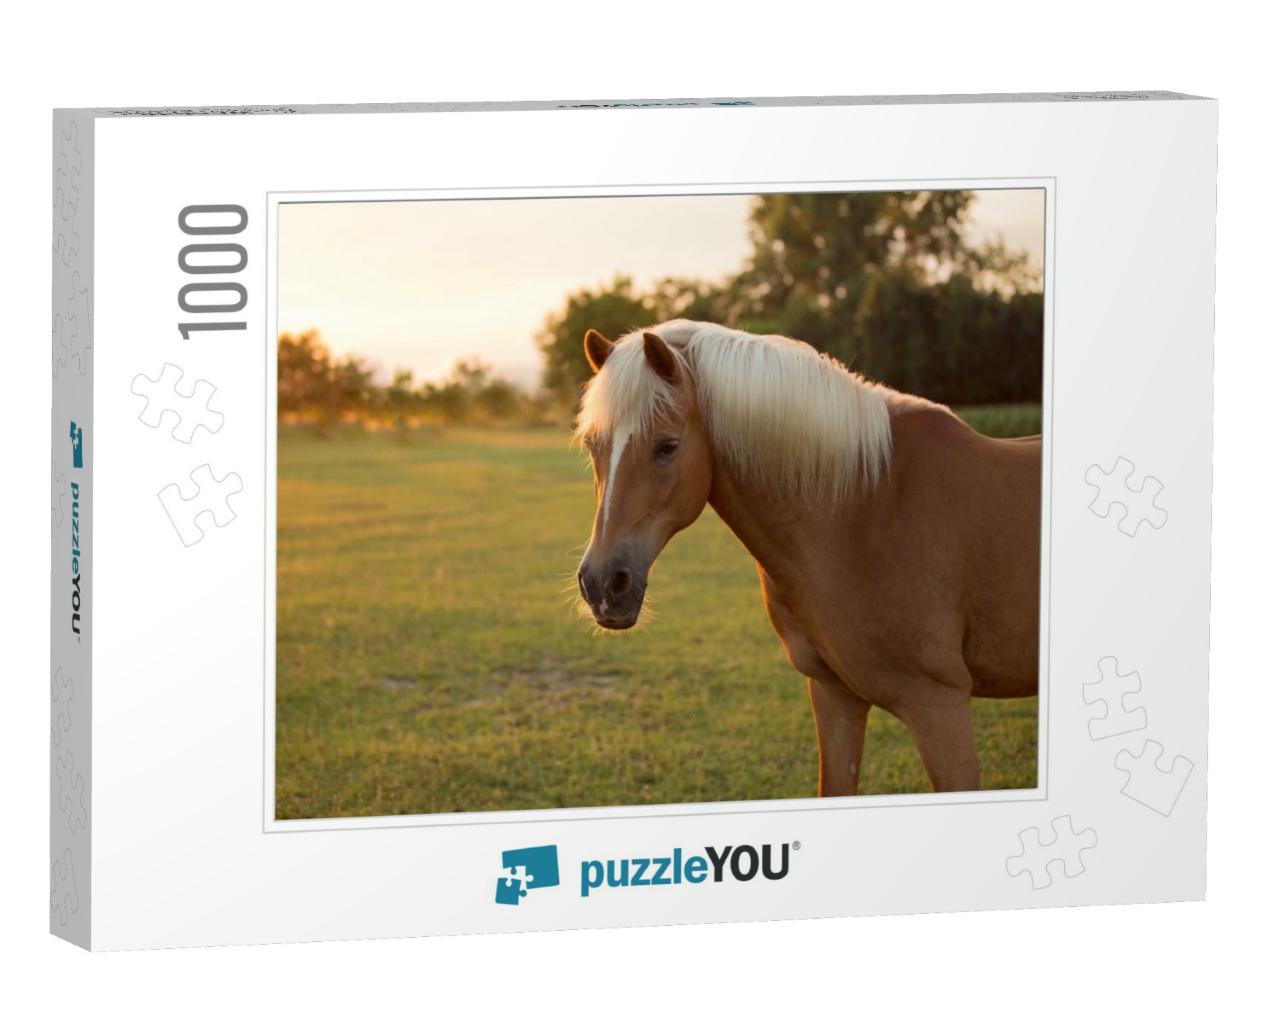 Beautiful Palomino Haflinger Horse Portrait on Aa Pasture... Jigsaw Puzzle with 1000 pieces